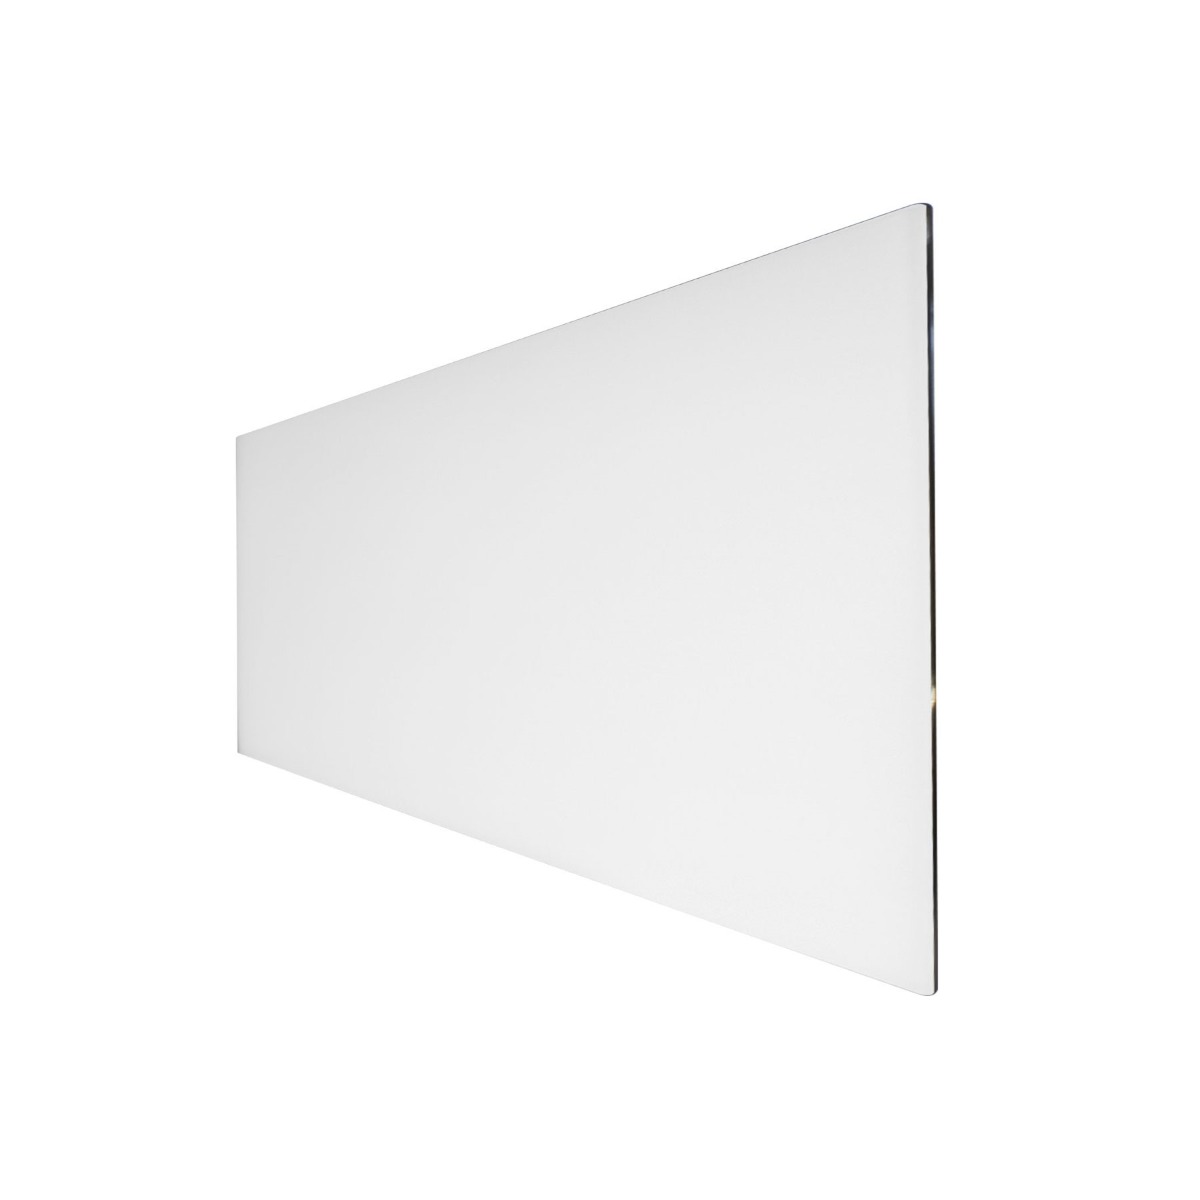 Technotherm ISP Design Glass Infrared Heating Panel - White 750w (1330 x 690mm)